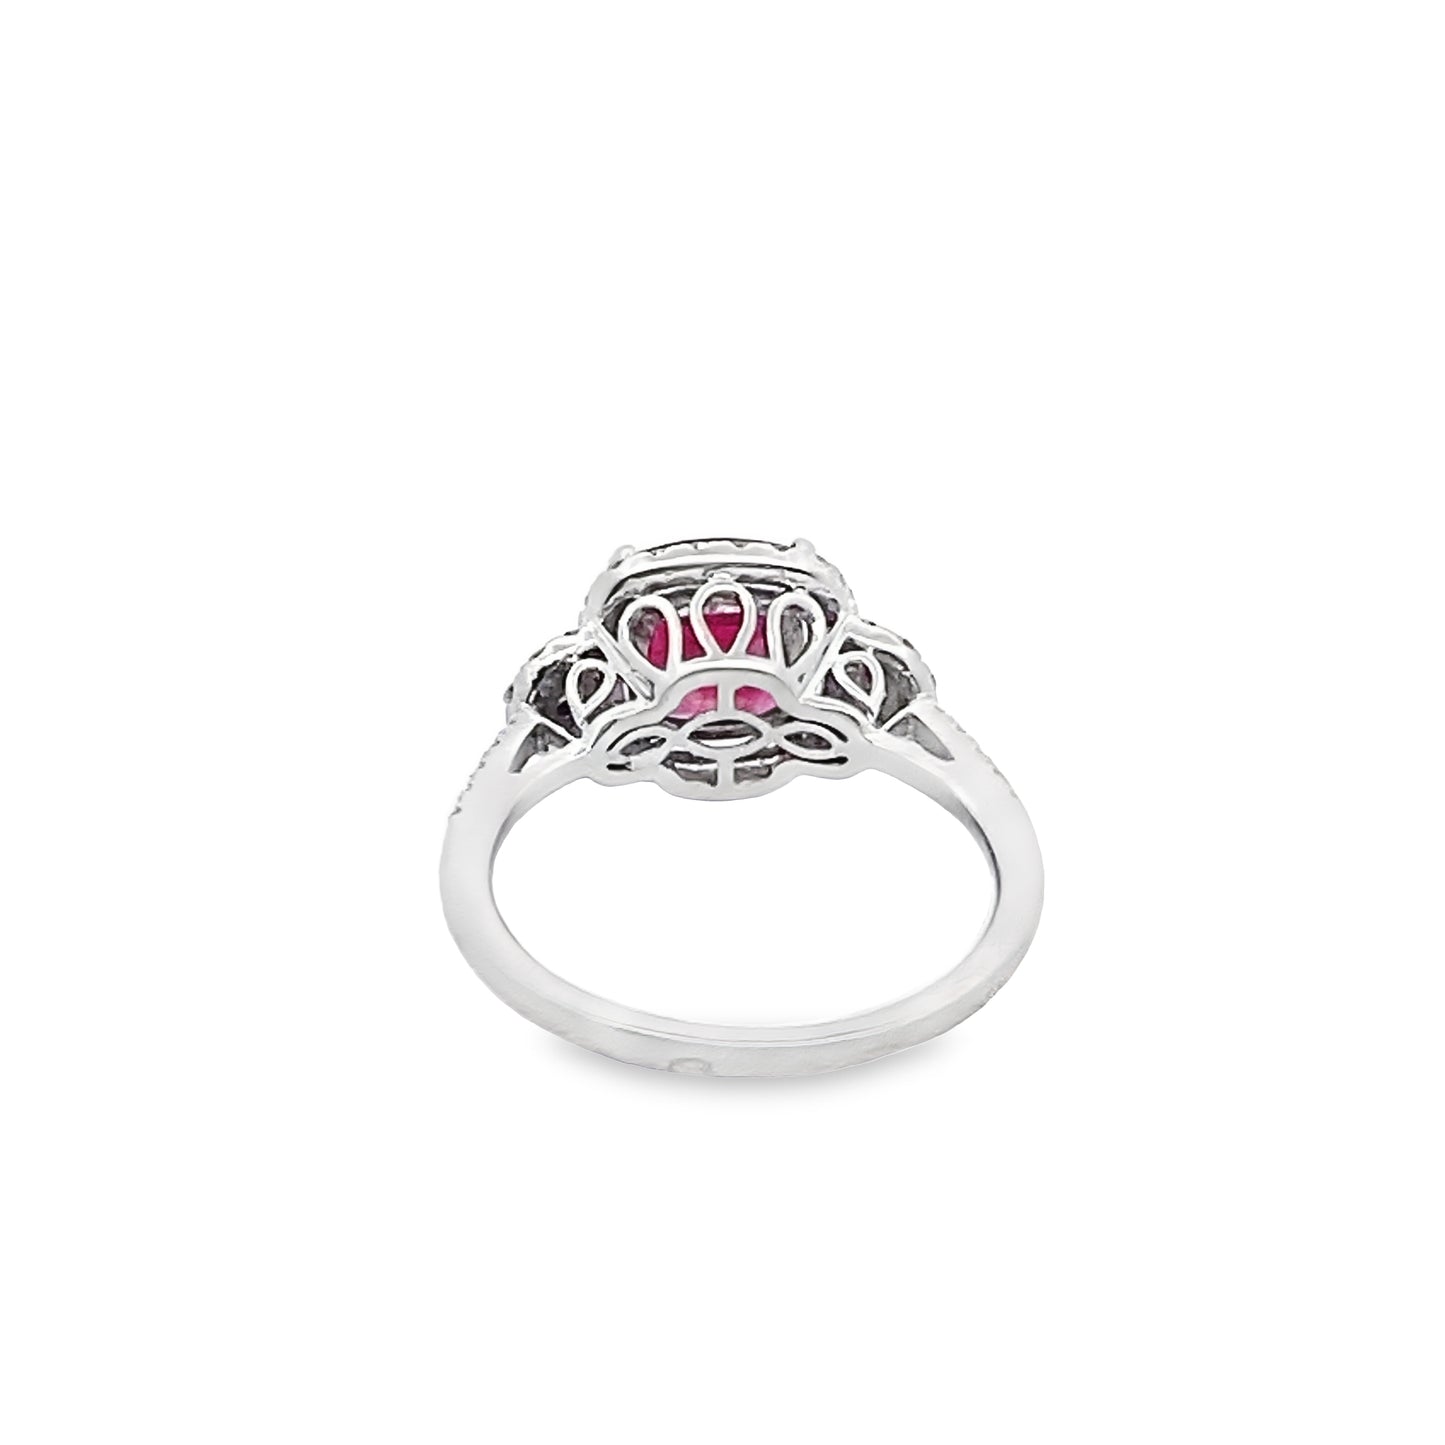 Halo Cushion-Cut Ruby and Round Brilliant-Cut Diamond Ring in 14K White Gold